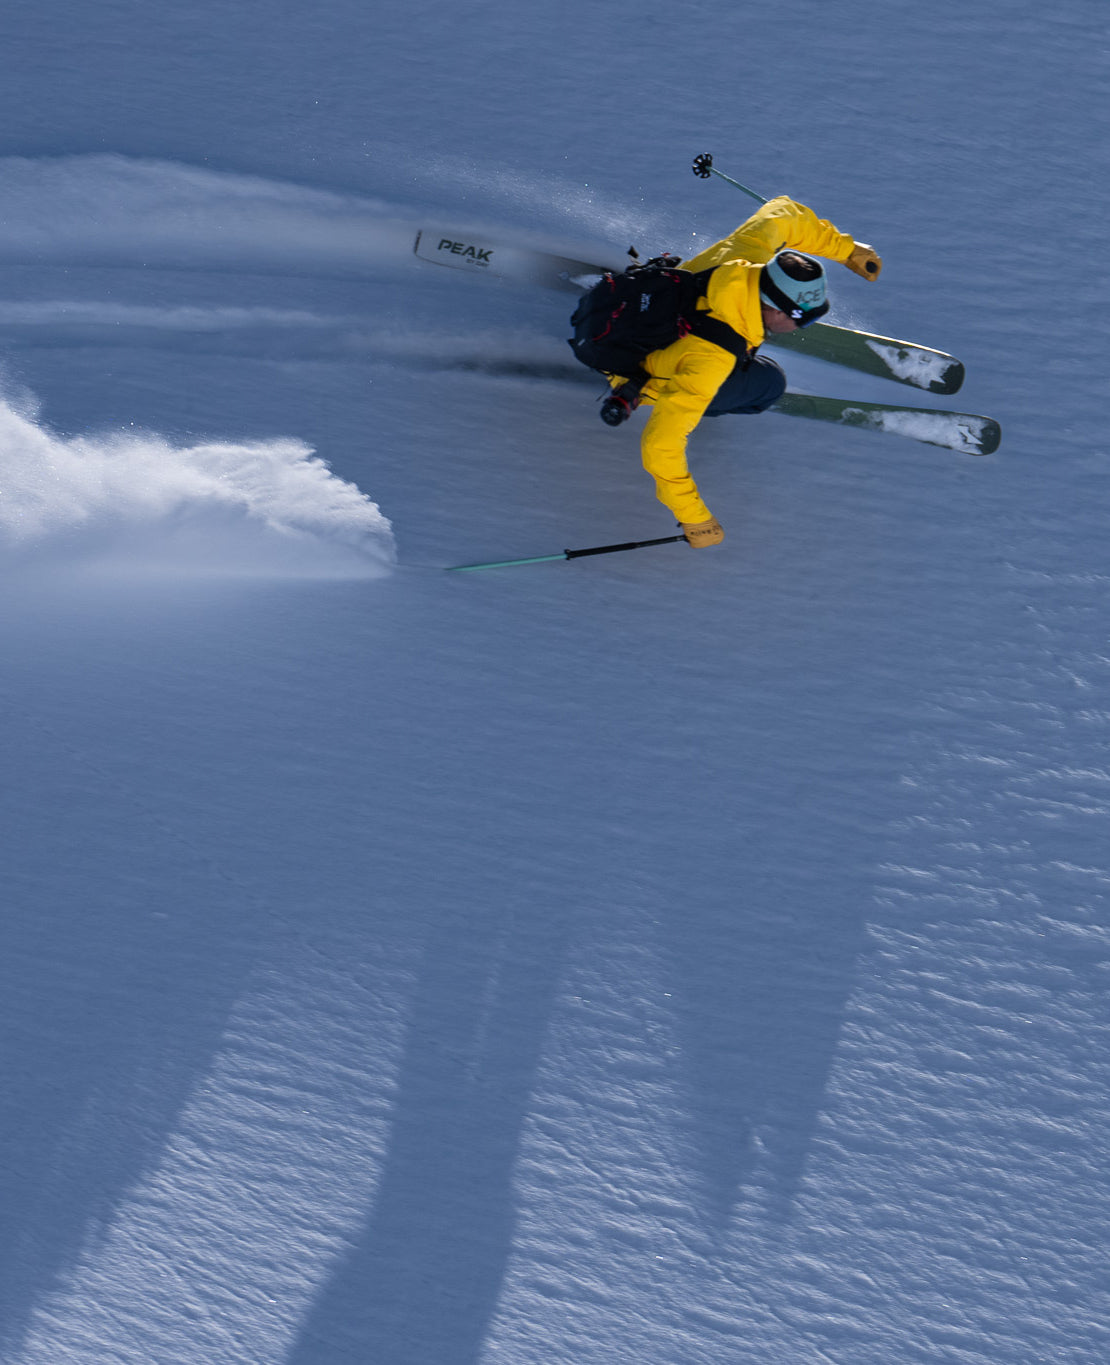 Aerial photo of a skier